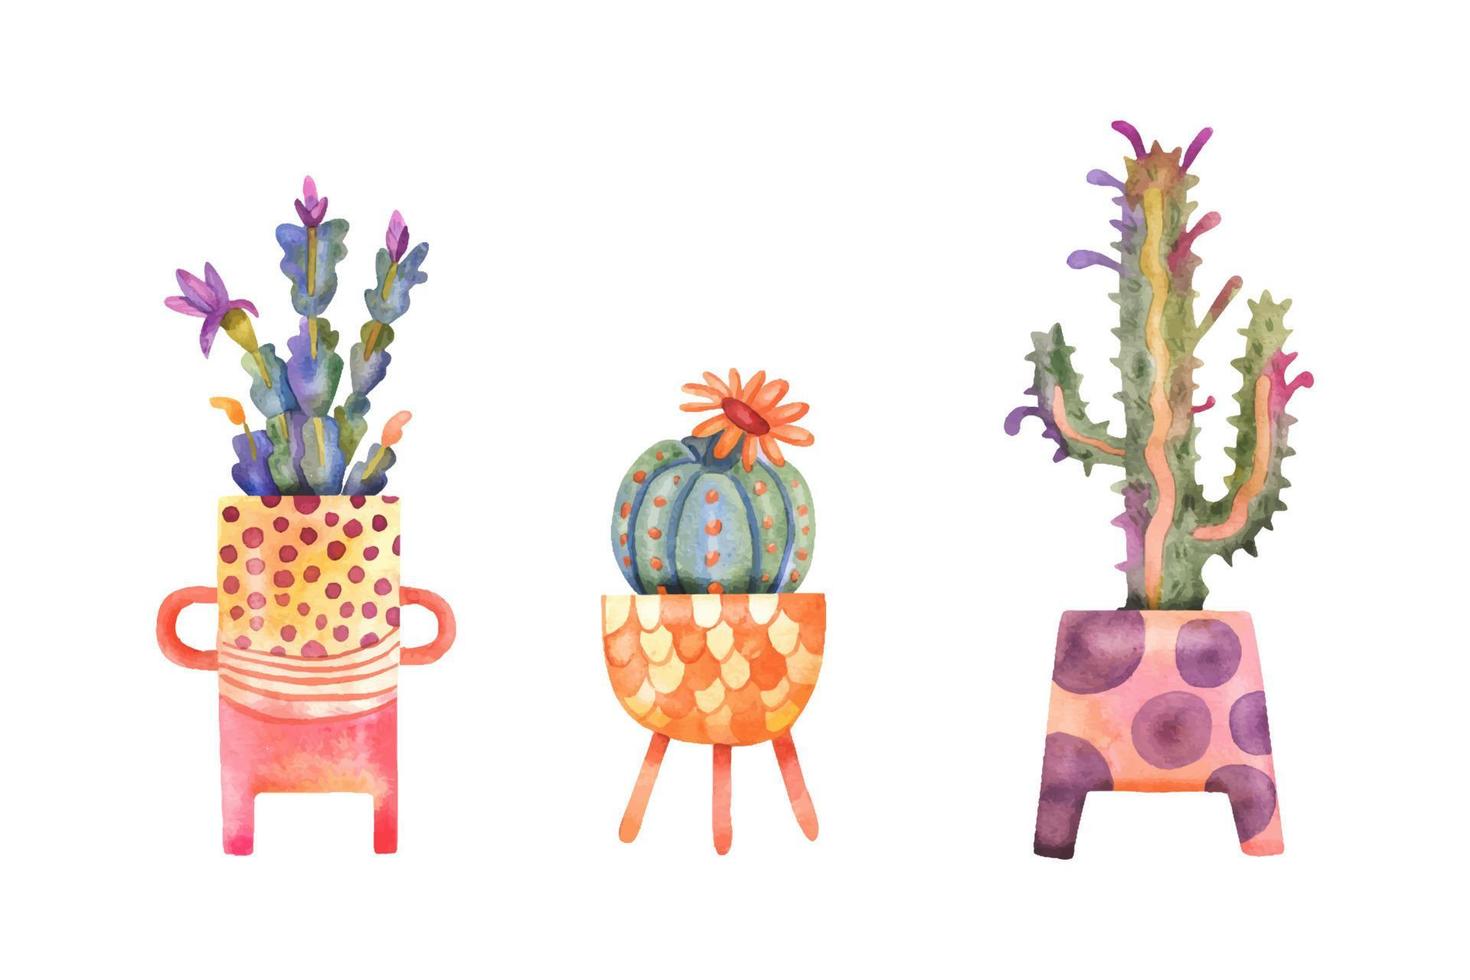 Watercolor cacti in pots collection. Hand drawn cactus and succulents in colorful and cute pots isolated on white vector